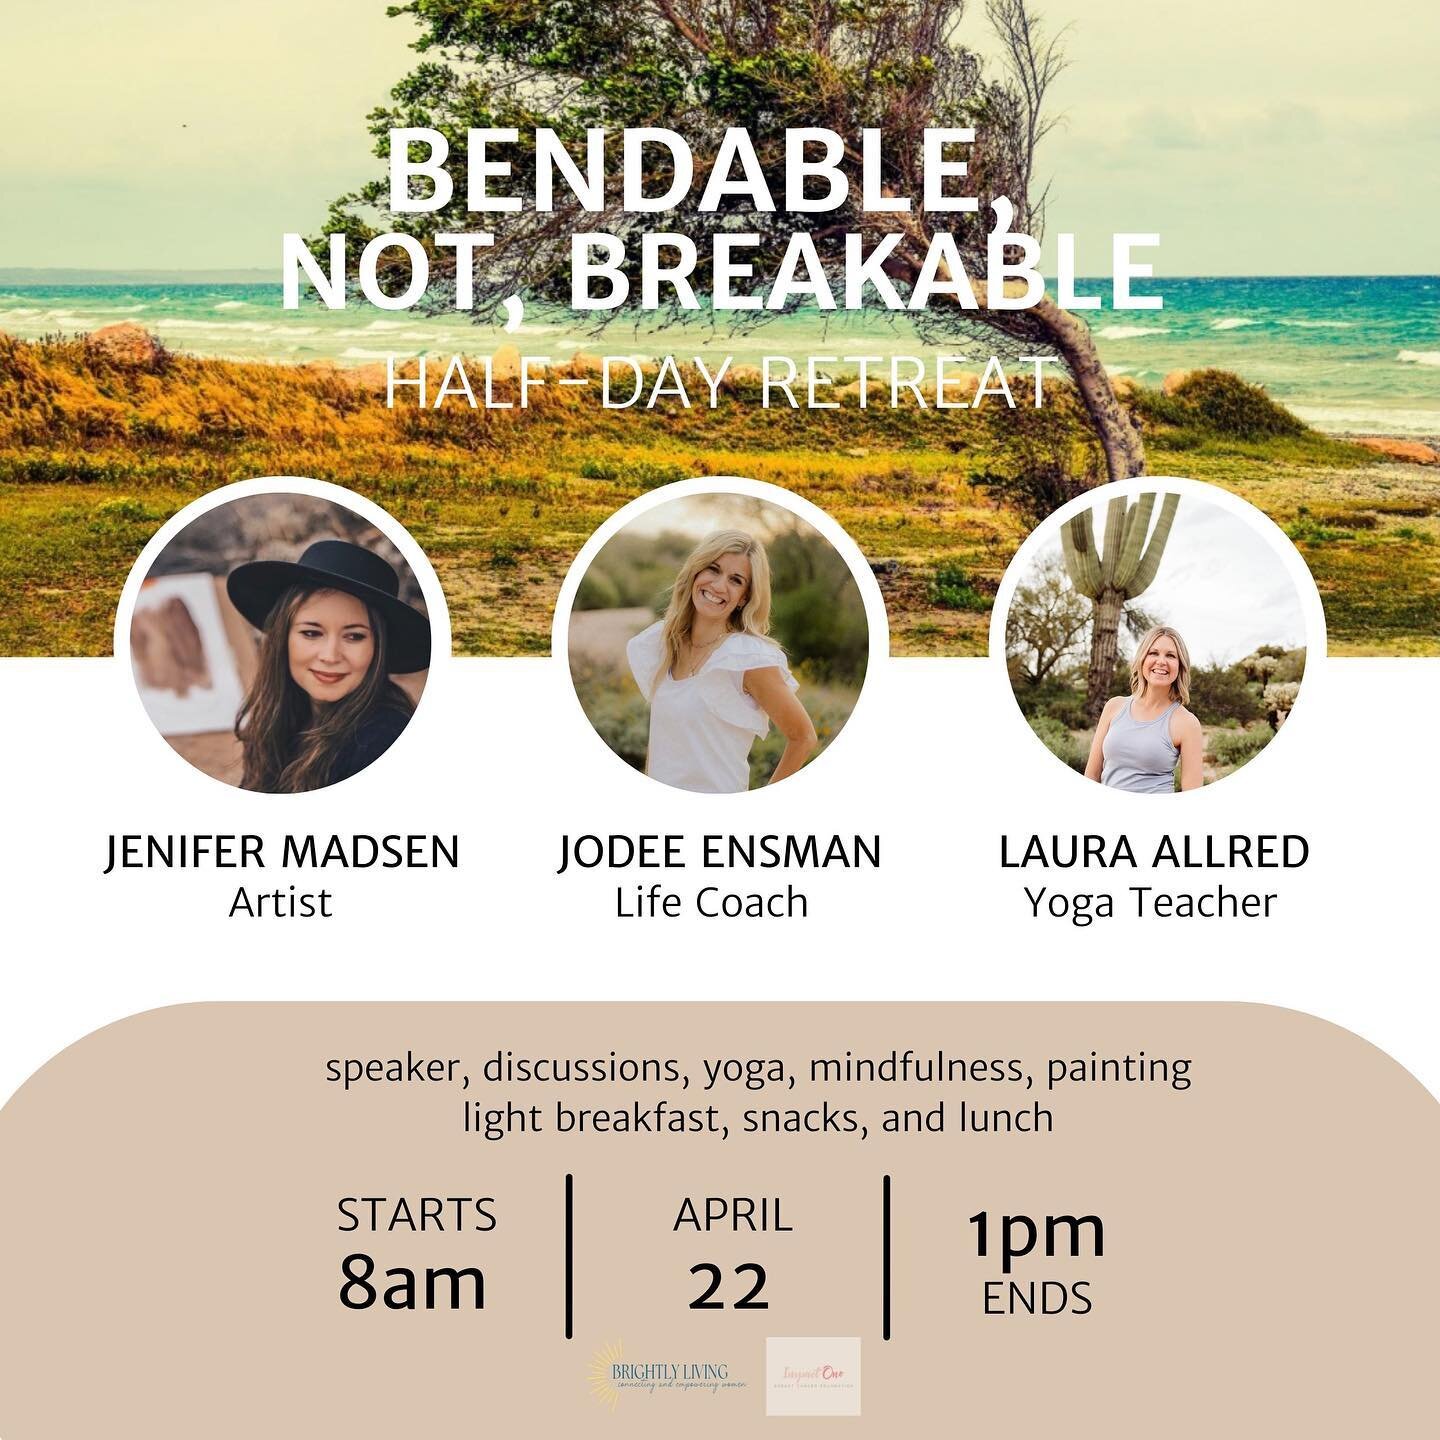 Register today for only $18 before the price goes up tomorrow!
www.brightlyliving.org

Can&rsquo;t wait to see you there!!! 🤗 

#brightlylivingretreats #brightlyliving #gilbertaz #bendablenotbreakable #womenssupport